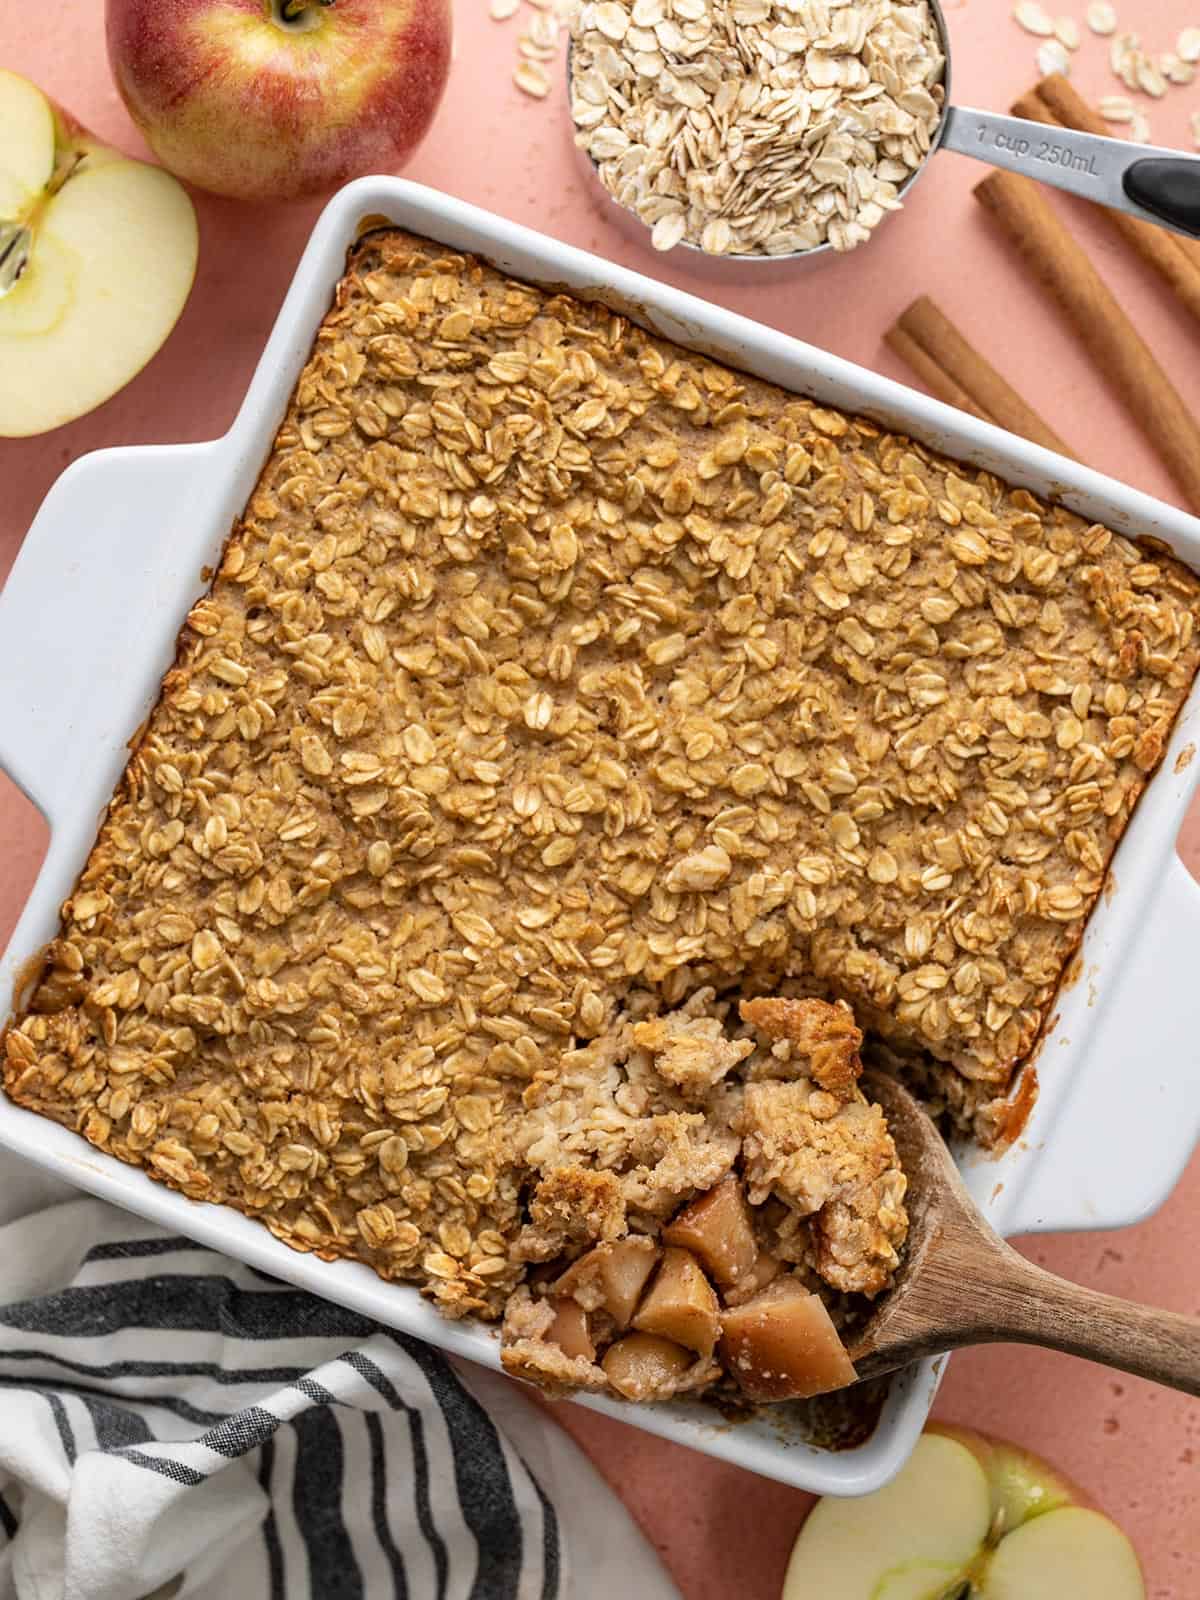 Overhead view of a casserole dish full of apple cinnamon baked oatmeal with the corner being scooped out.